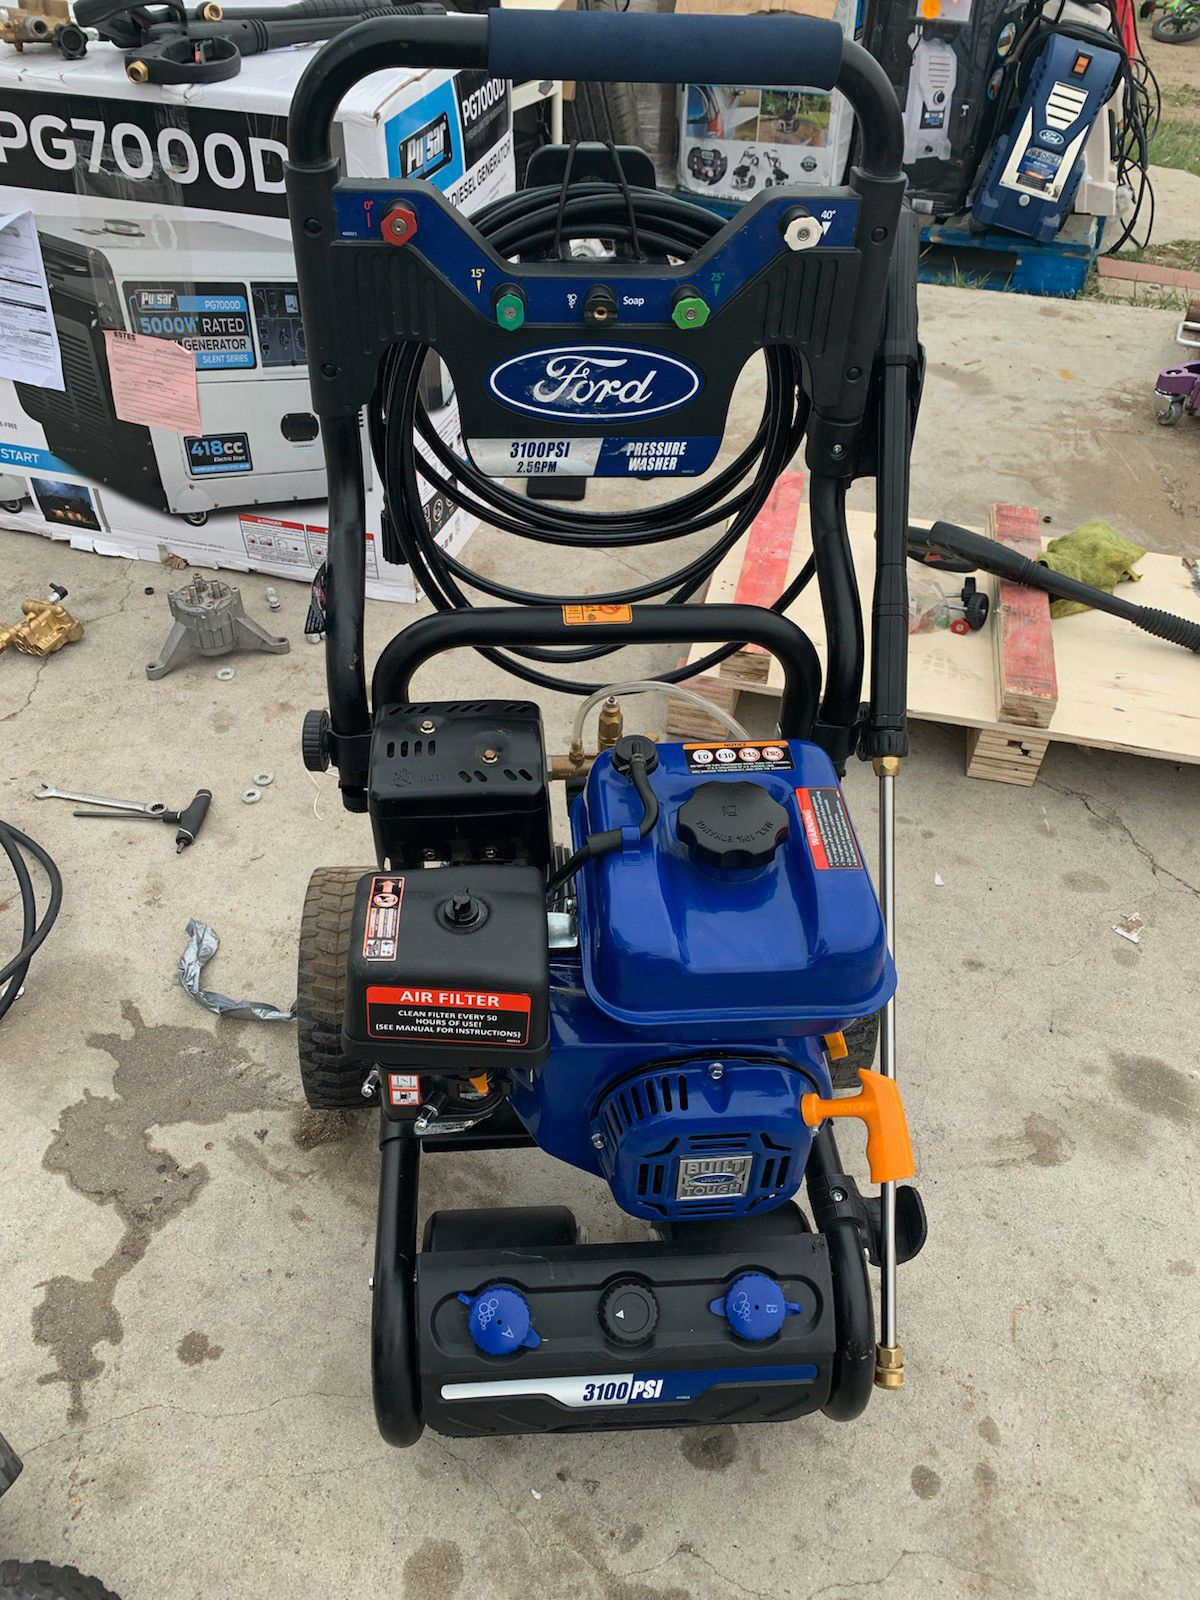 3100 psi ford Pressure washer